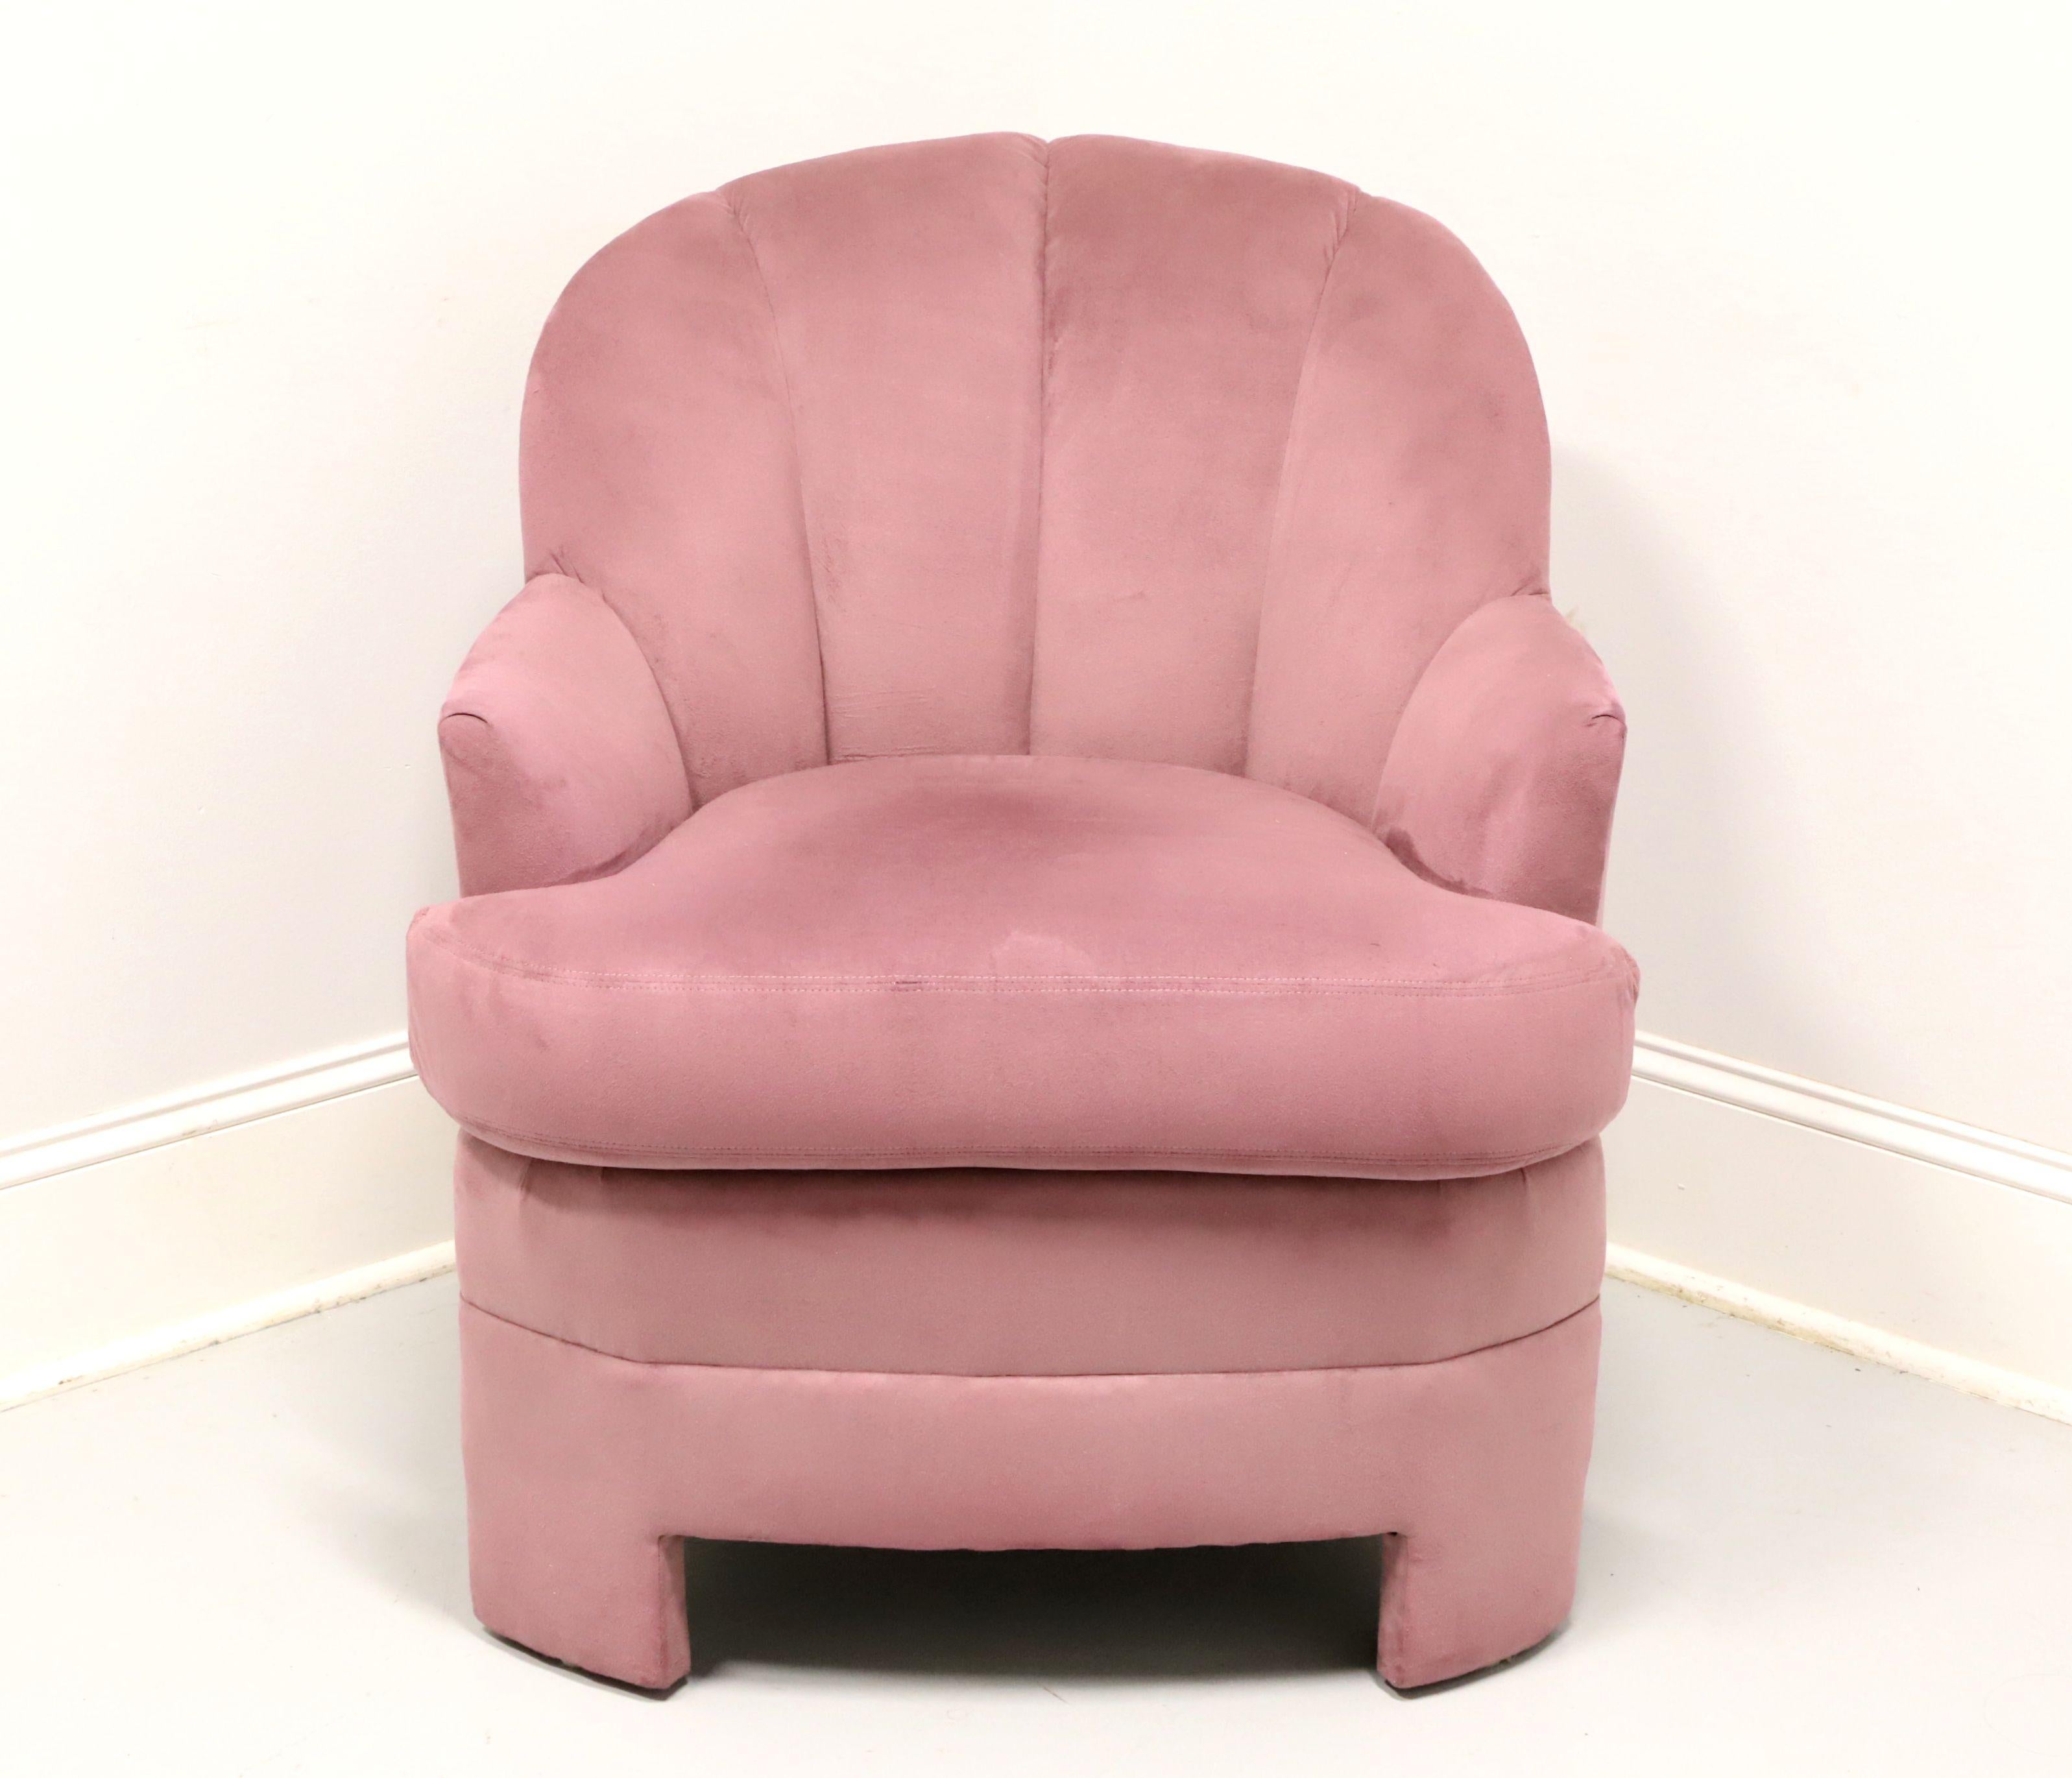 An Art Deco style upholstered club chair by Classic Gallery. Solid wood frame, mauve color velvet fabric upholstery, tufted rounded back, rounded fully upholstered arms, ventilated clip stay seat cushion and fully upholstered base. Made in the USA,